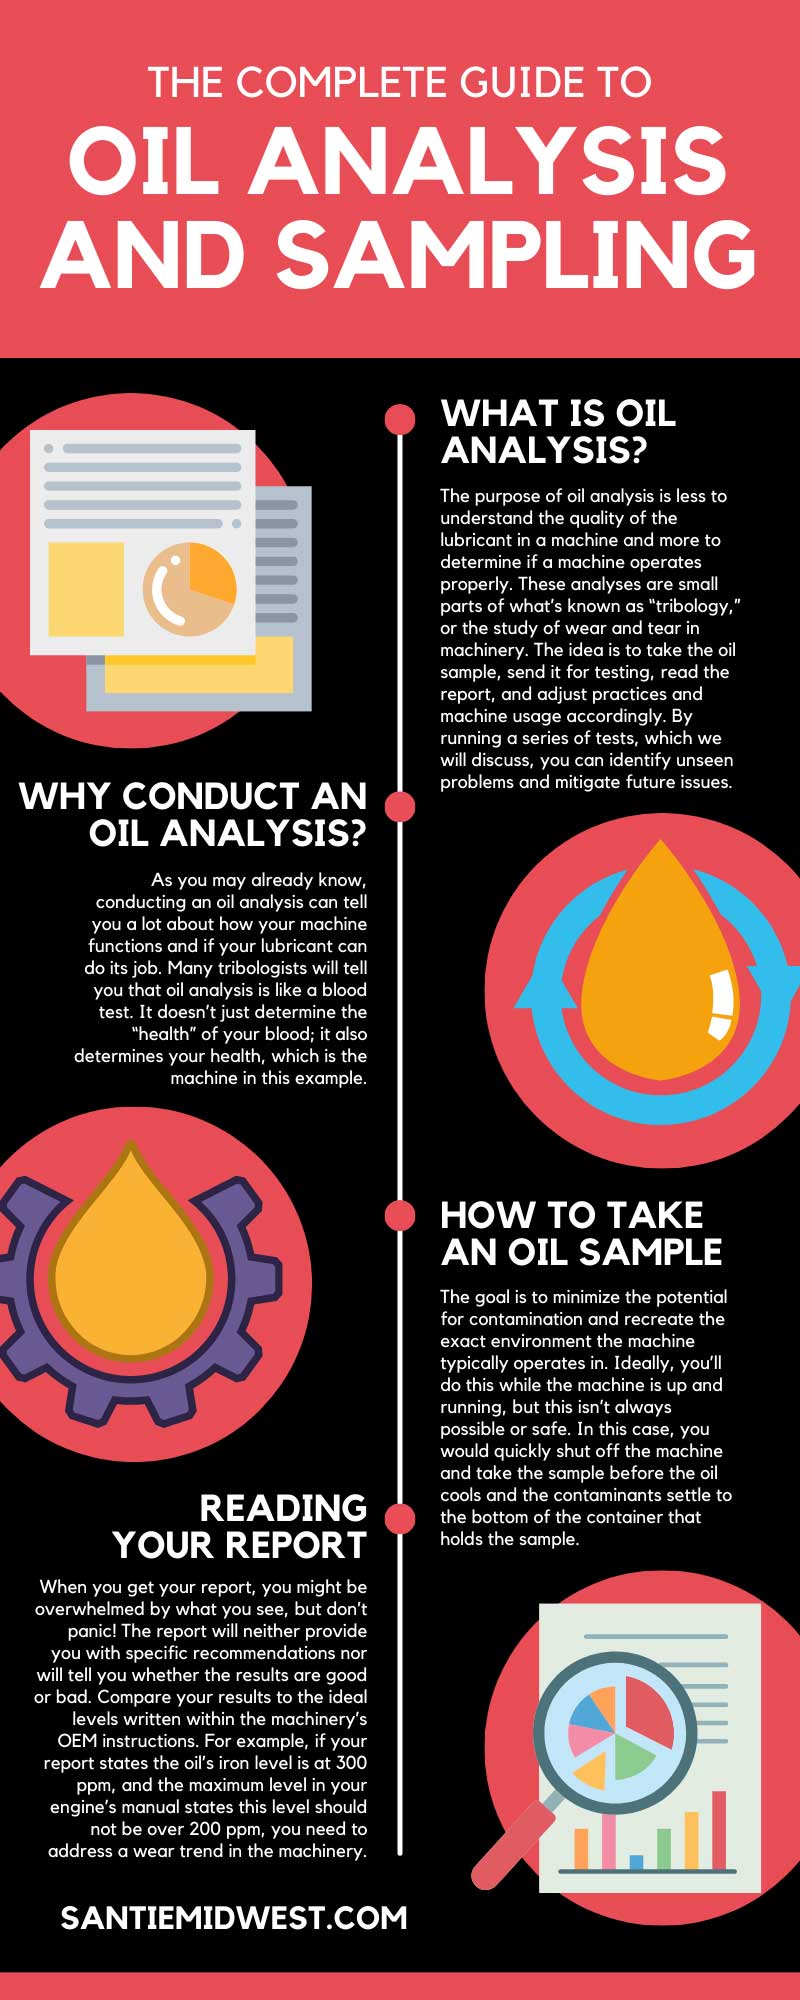 The Complete Guide to Oil Analysis and Sampling